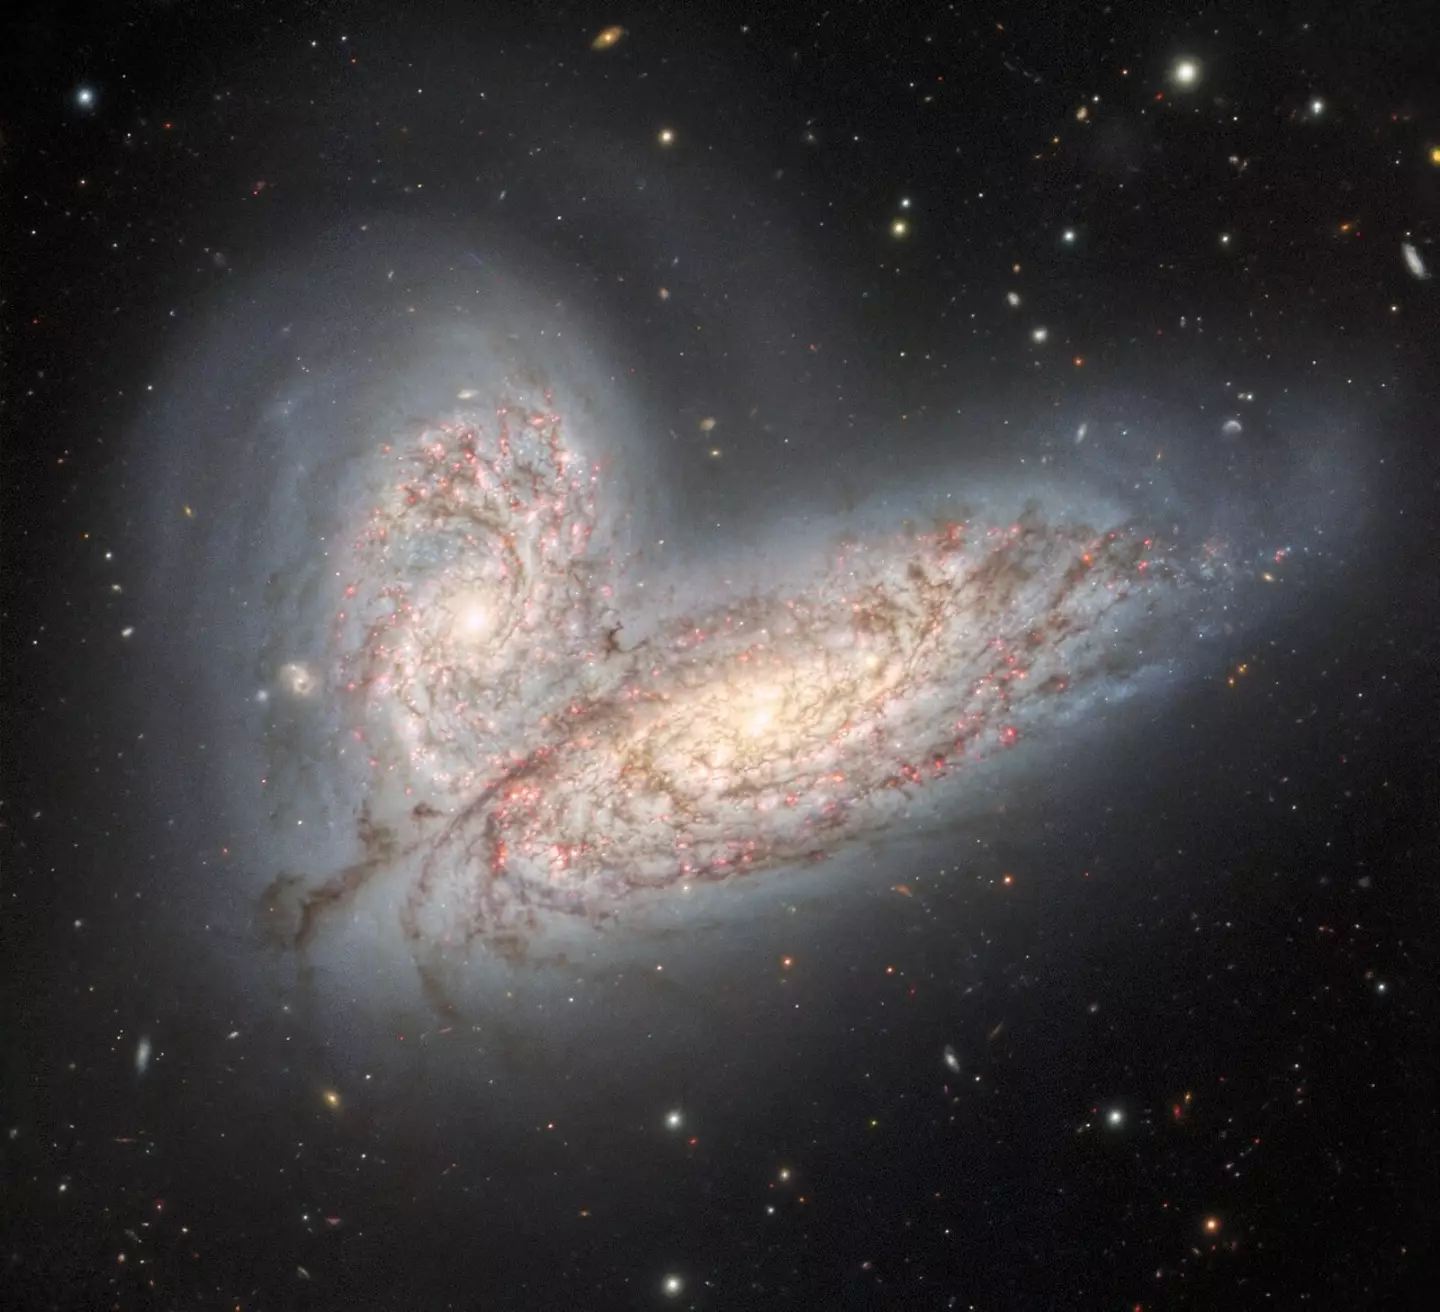 This image was captured last year and shows two spiral galaxies -  NGC 4568 and NGC 4567 - crashing into each other.